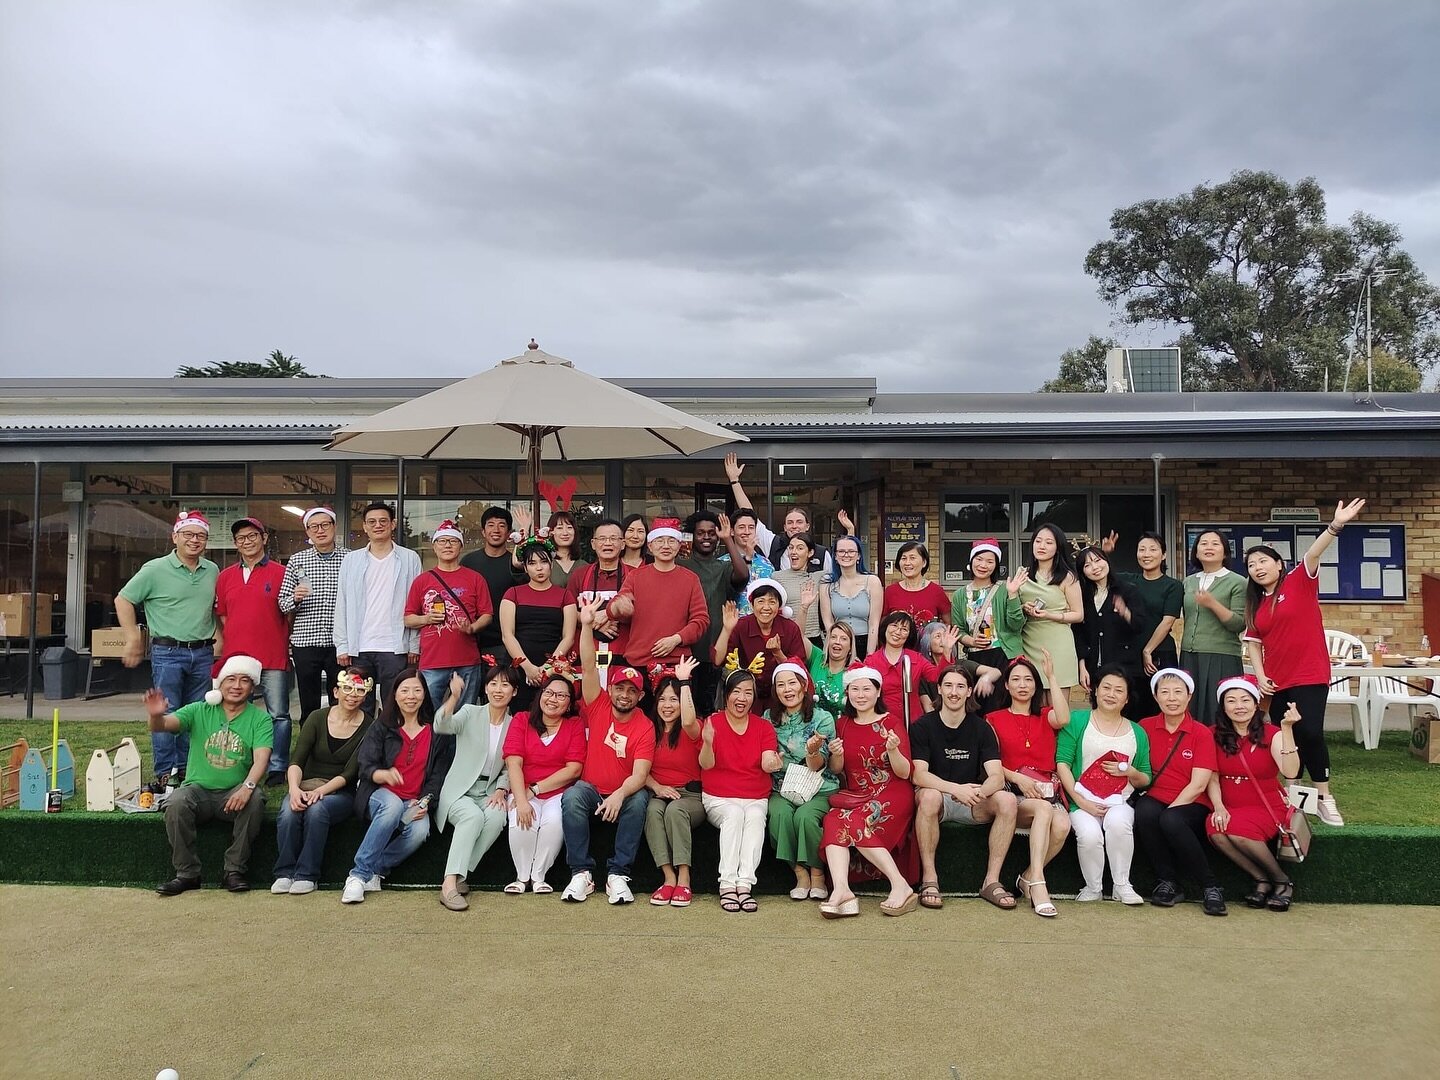 Merry Christmas and a Happy New Year from all of us at CSG! 🎄🎅 🎉 🎈

🏷️ 
#smallbusinessmelbourne #smallbusinessvictoria #ndis #ndissupport #ndisaustralia #ndissupportcoordination #supportcoordination #disabilityawareness #disabilityinclusion #dis